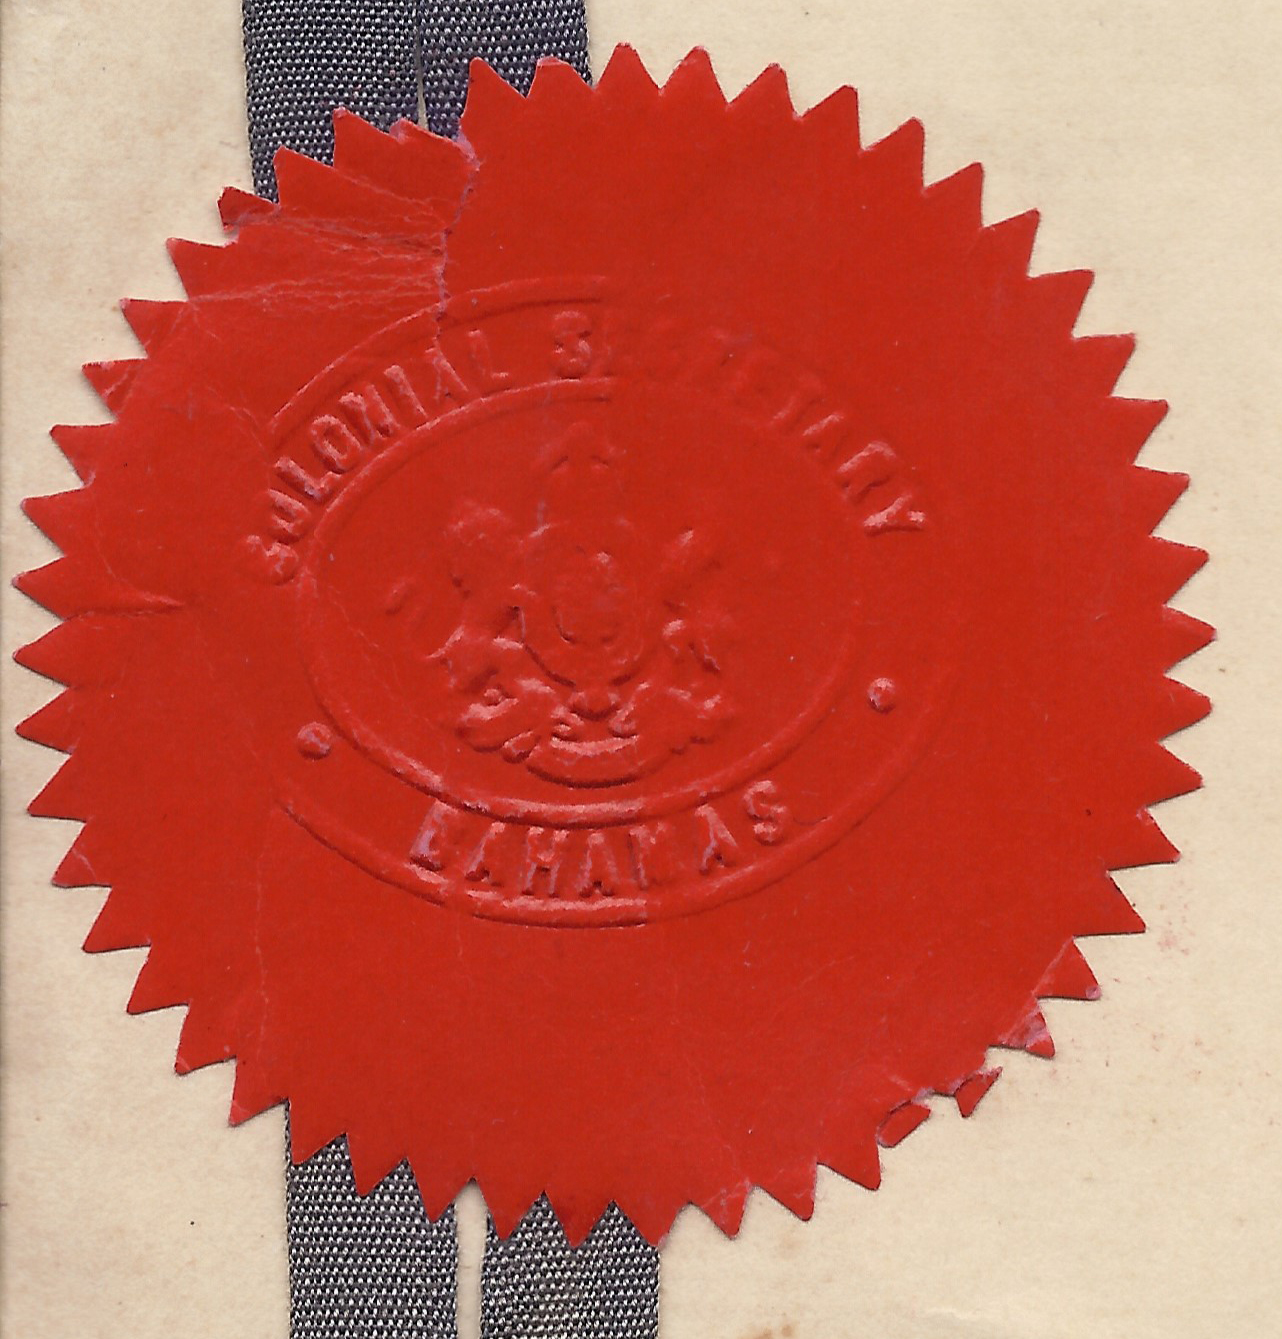 A Lasting Impression: The Importance of the Official Seal On the Hawksbill Creek Agreement